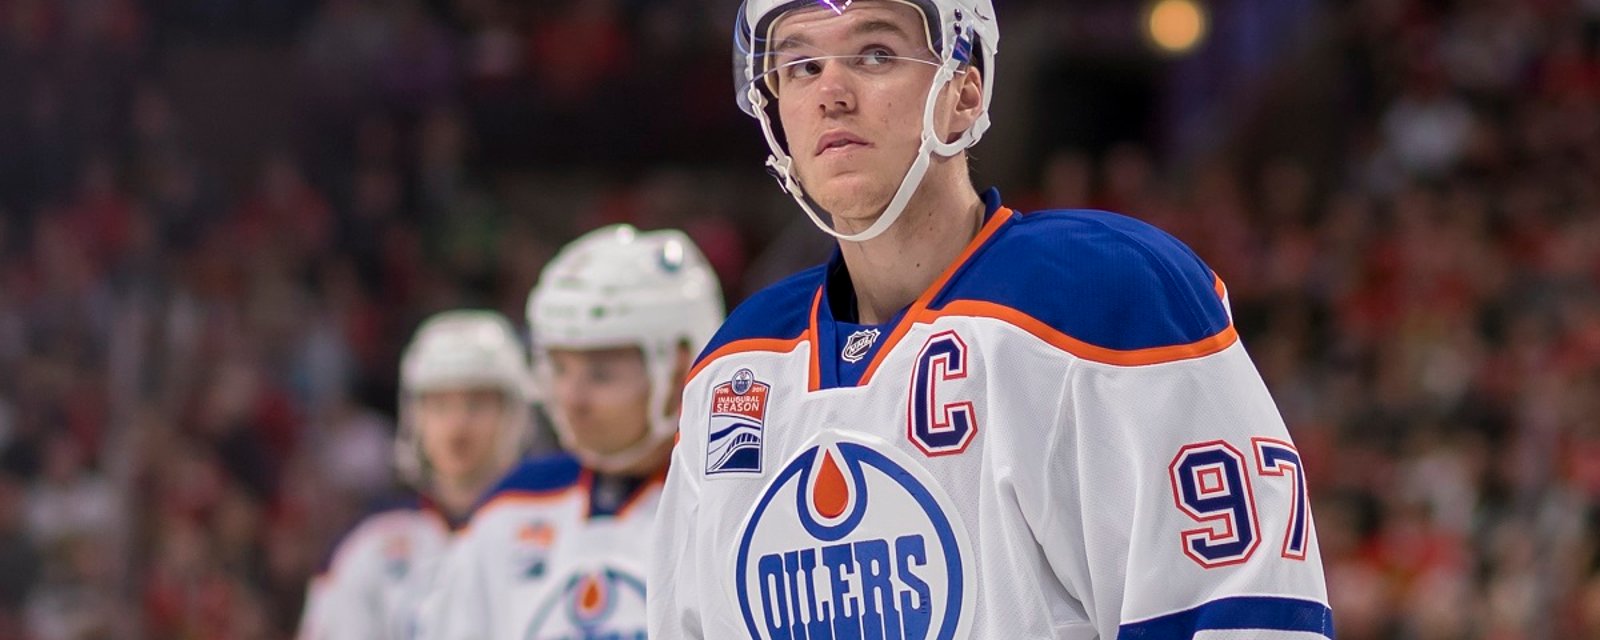 Breaking: New details make McDavid's contract even more insane!